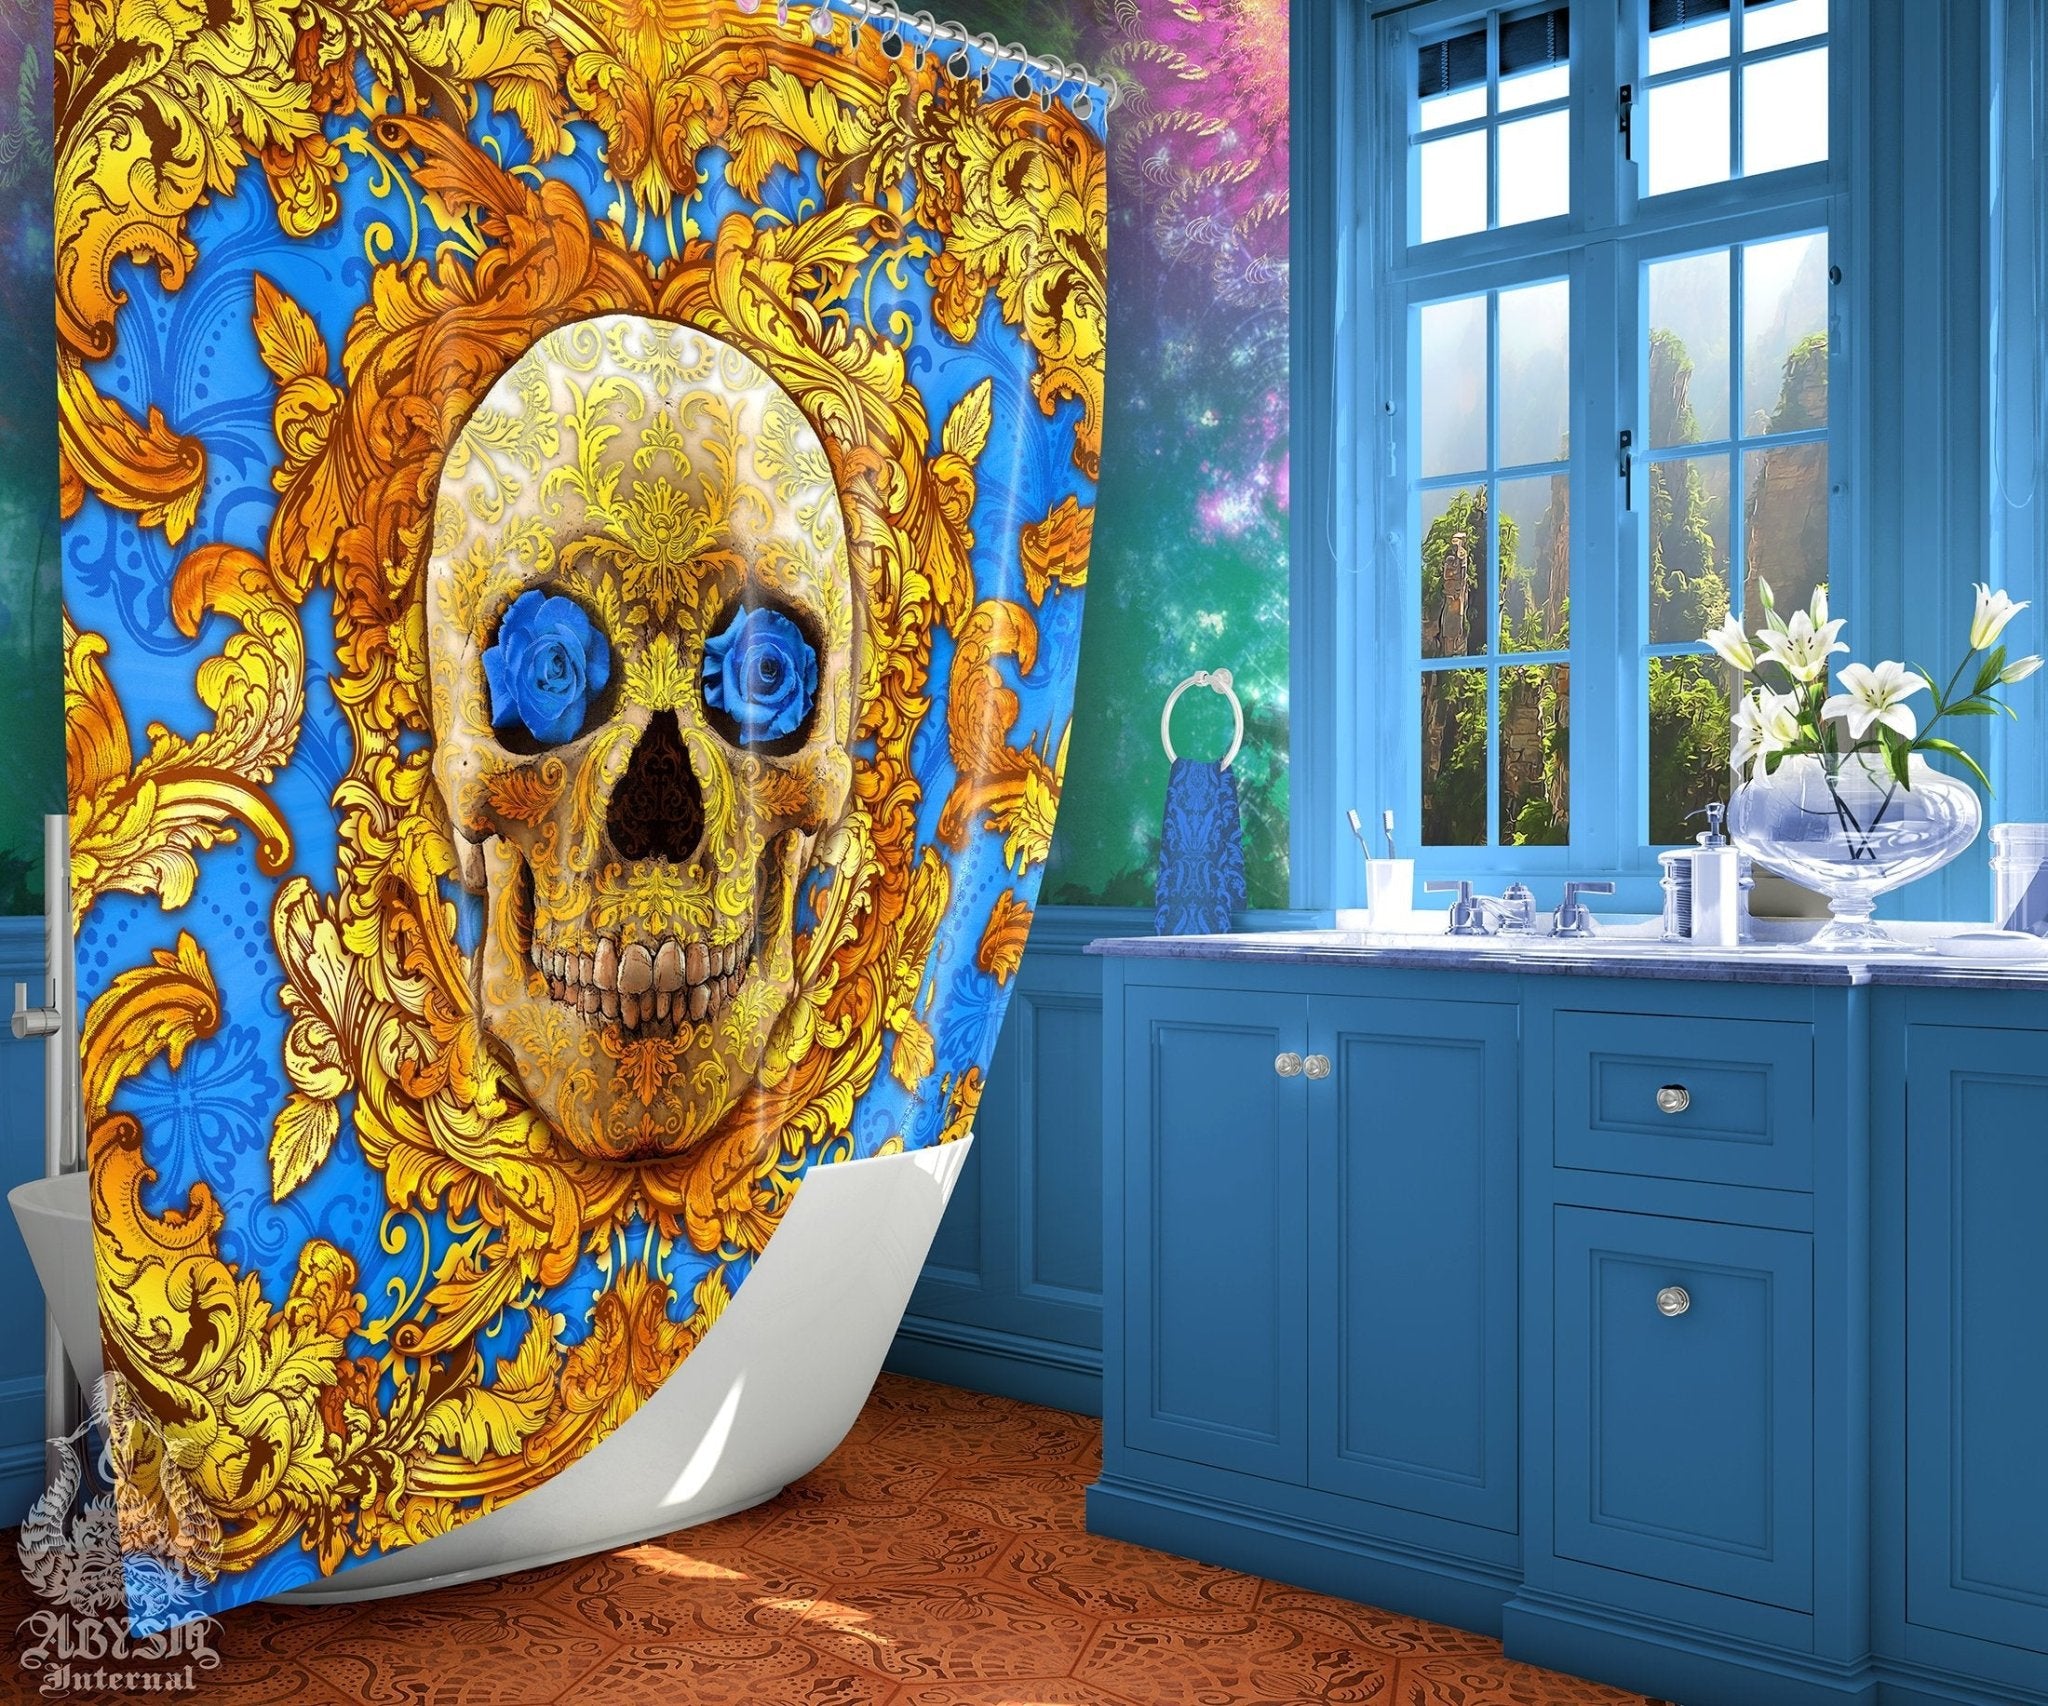 Skull Shower Curtain, Baroque Bathroom Decor, Victorian, Vintage Ornaments, Eclectic and Funky Home - Cyan - Abysm Internal